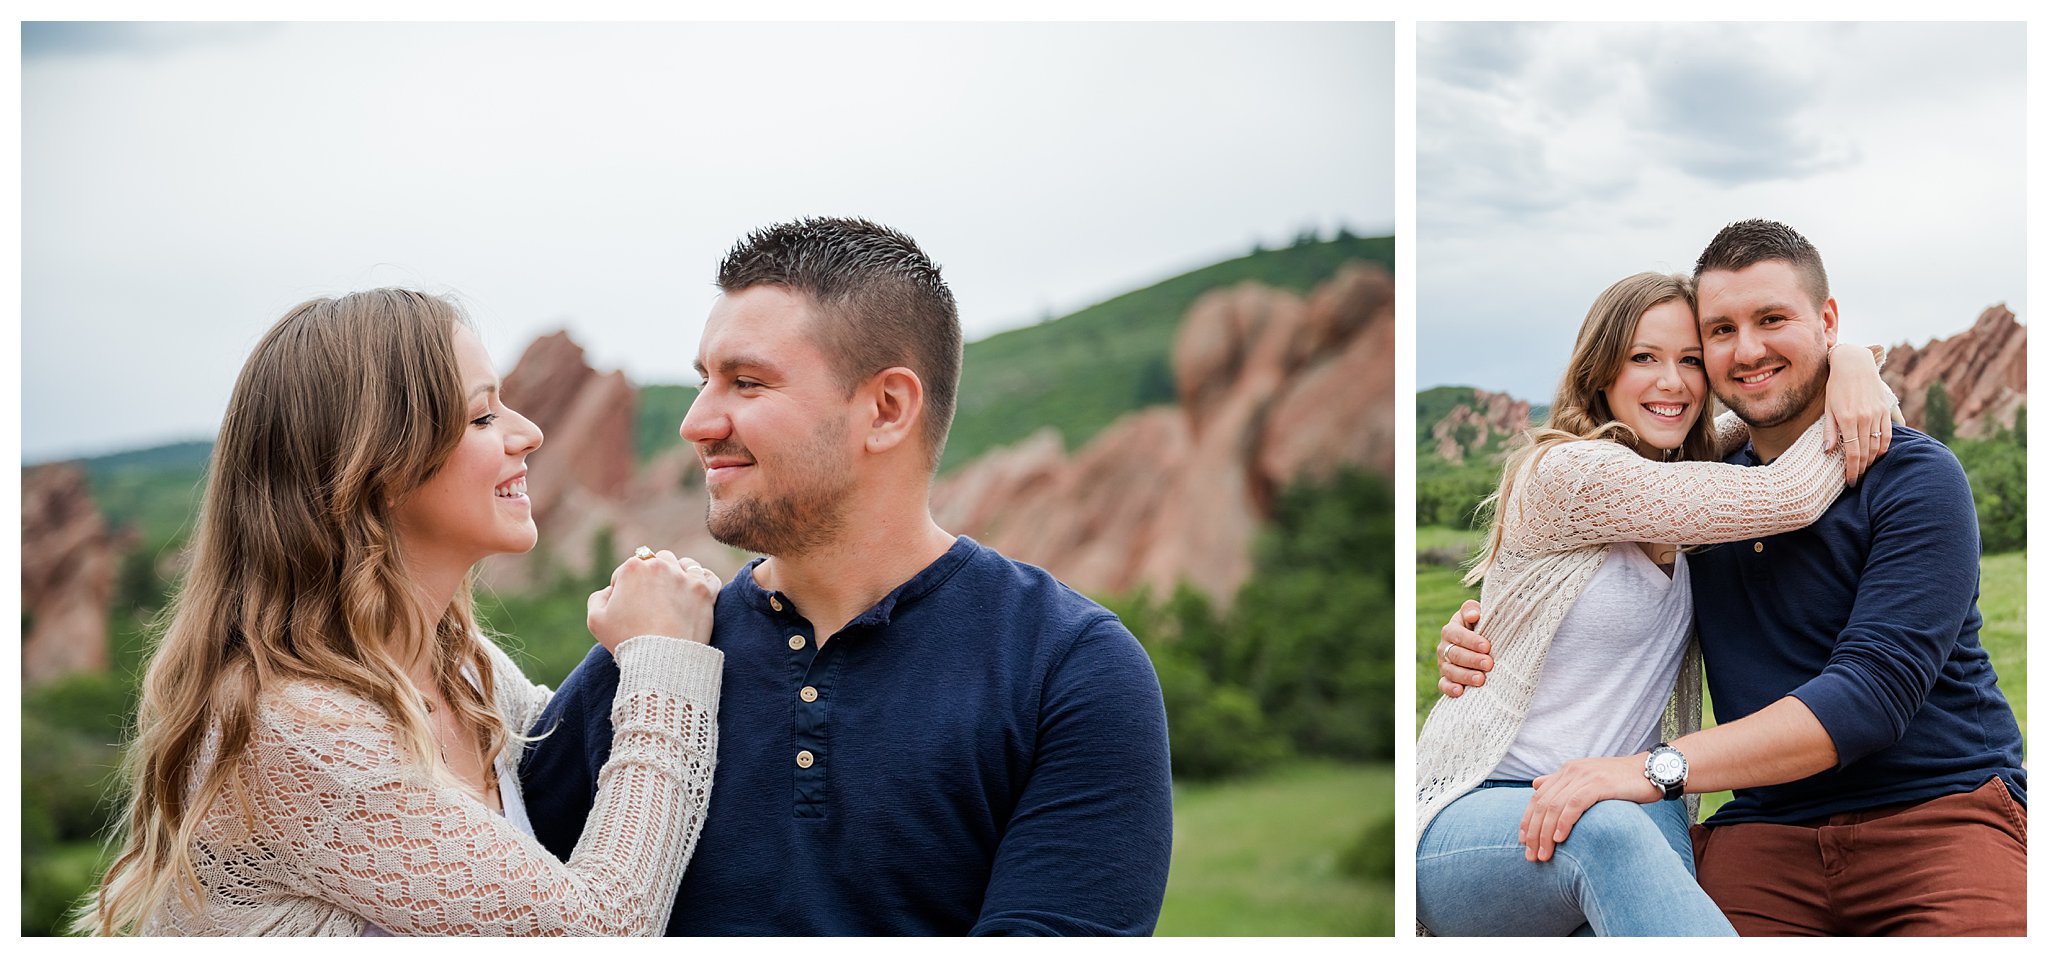 Couple poses in front of a green field and red rocks